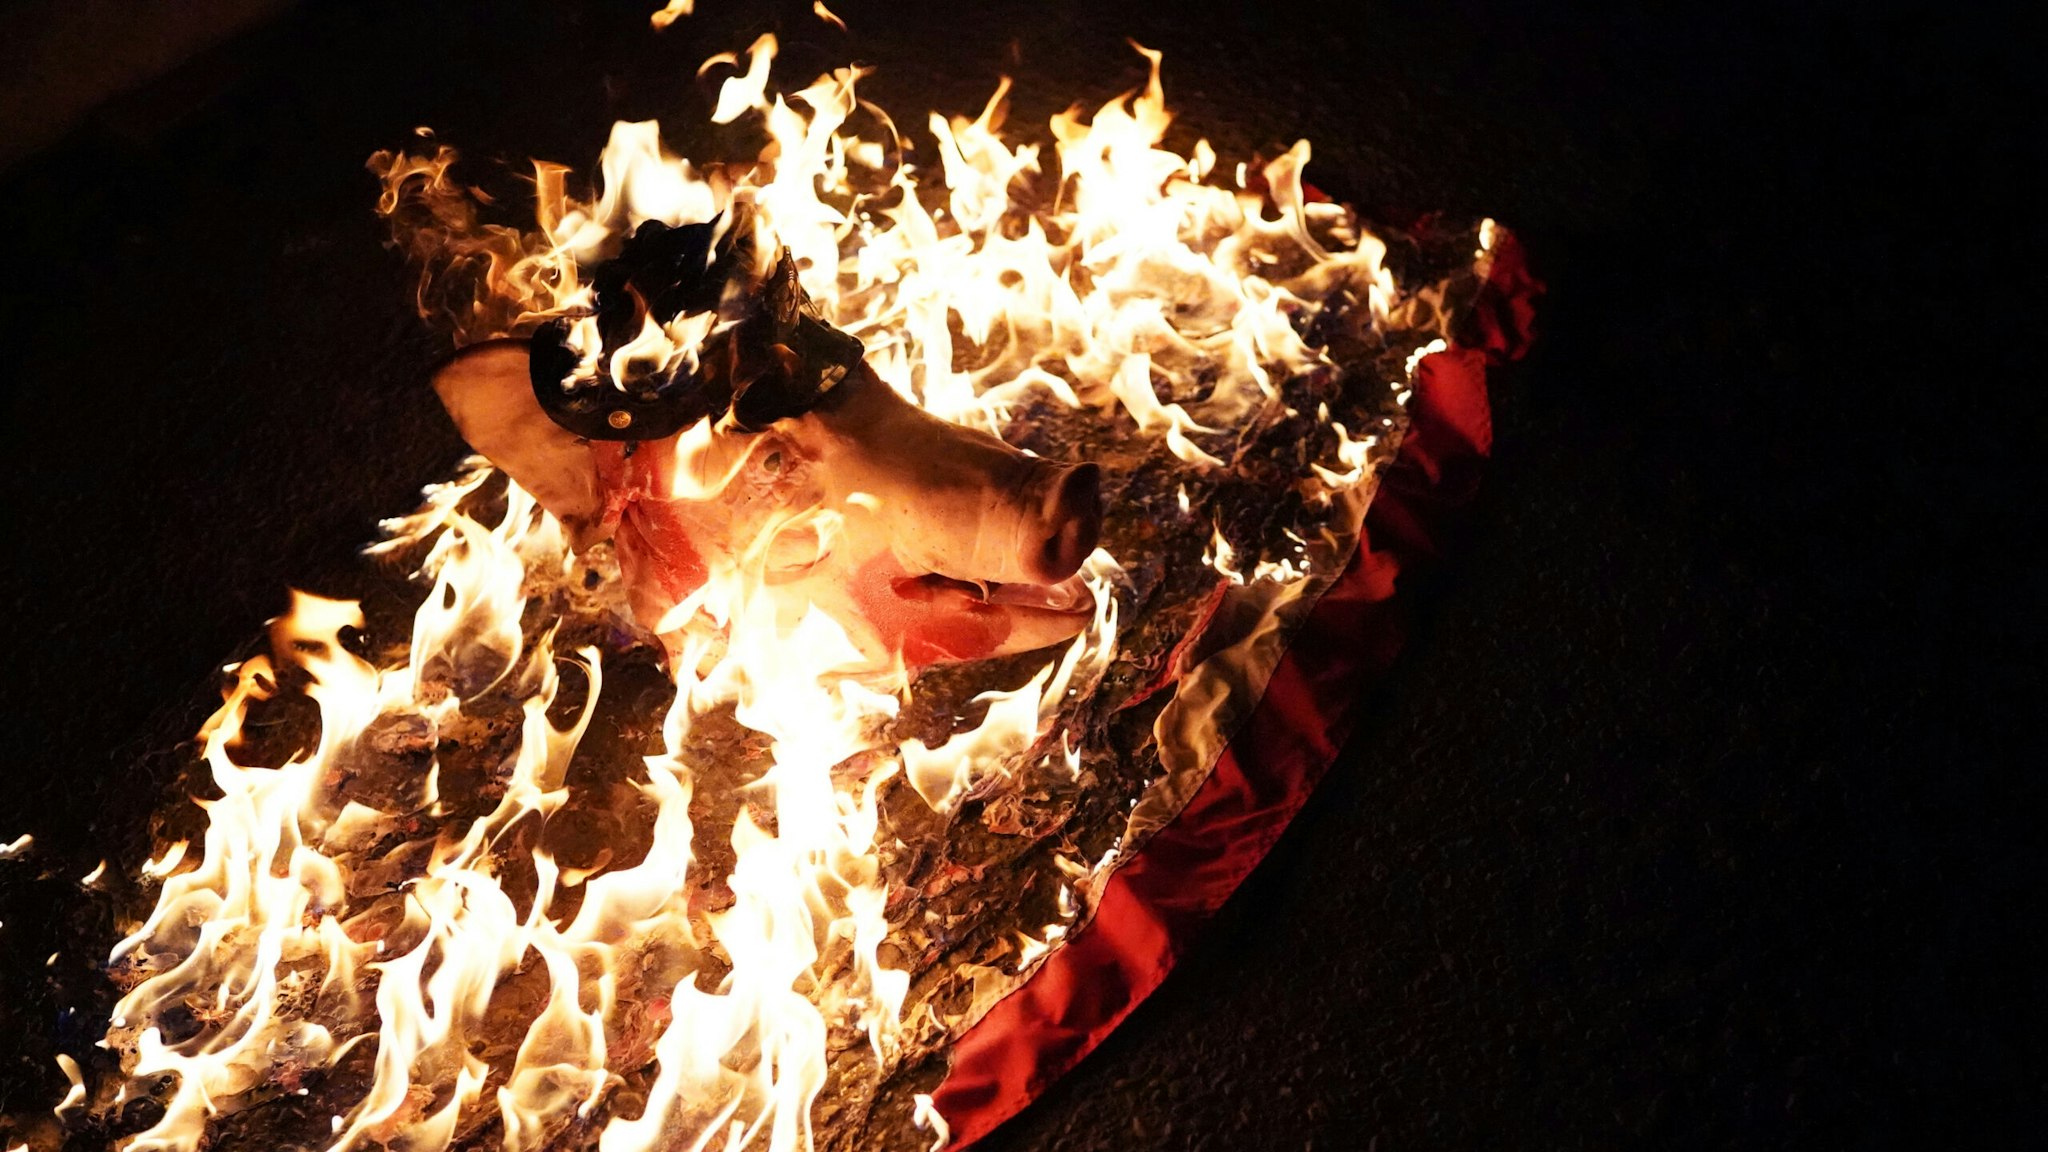 PORTLAND, OR - JULY 30: A pigs head burns during a protest against racial injustice and police brutality in front of the Mark O. Hatfield U.S. Courthouse on July 30, 2020 in Portland, Oregon. Federal officers began a phased withdrawal from the city Thursday, following weeks of violent clashes with protesters.